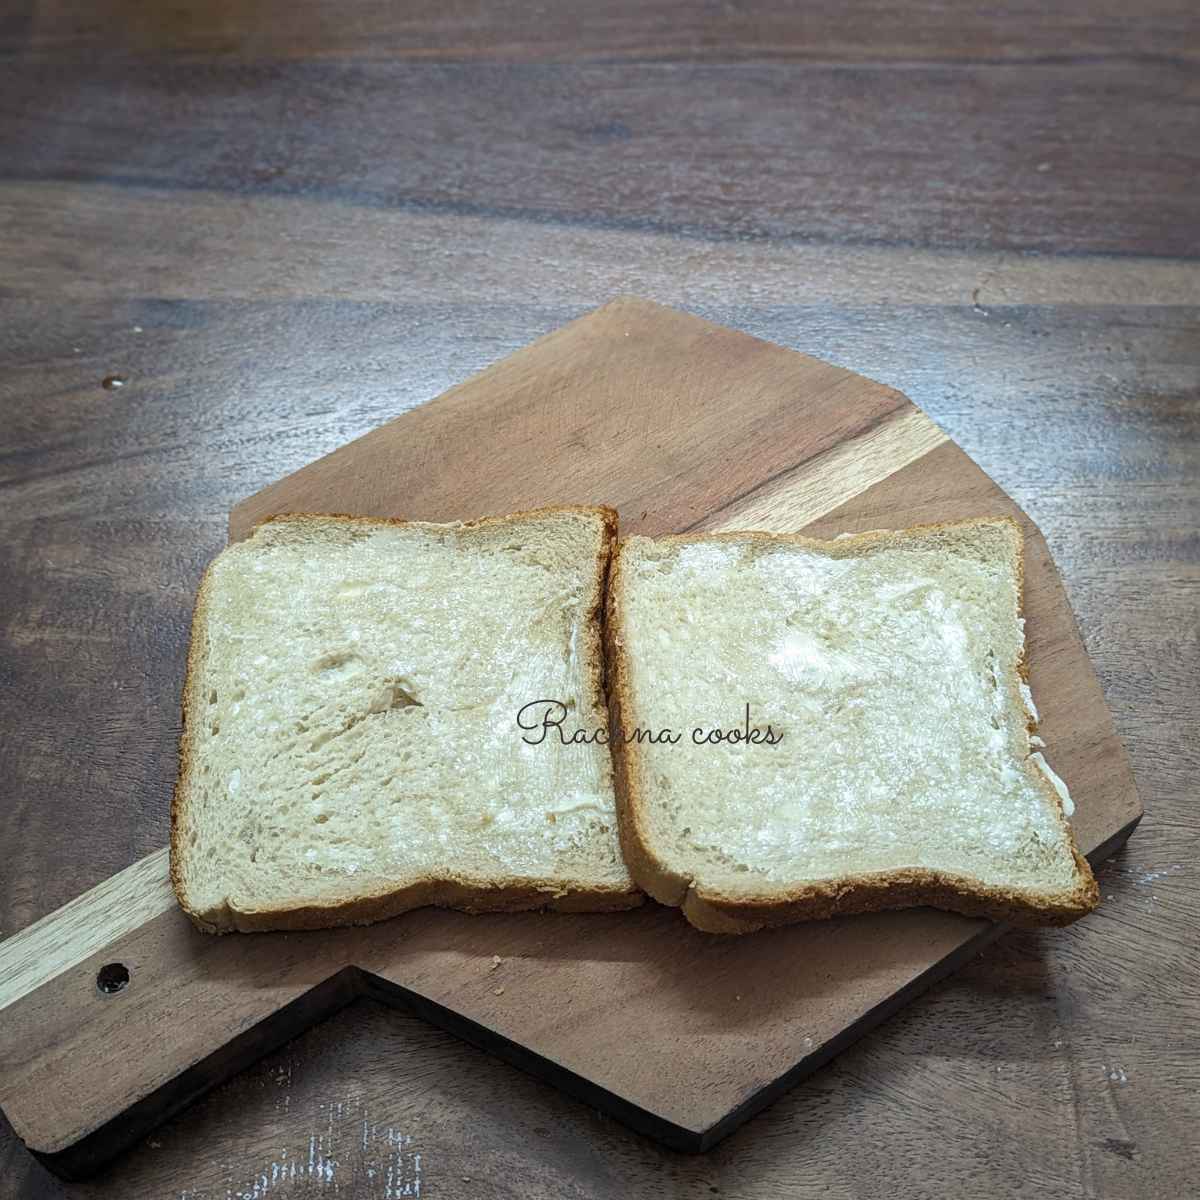 Buttered bread slices